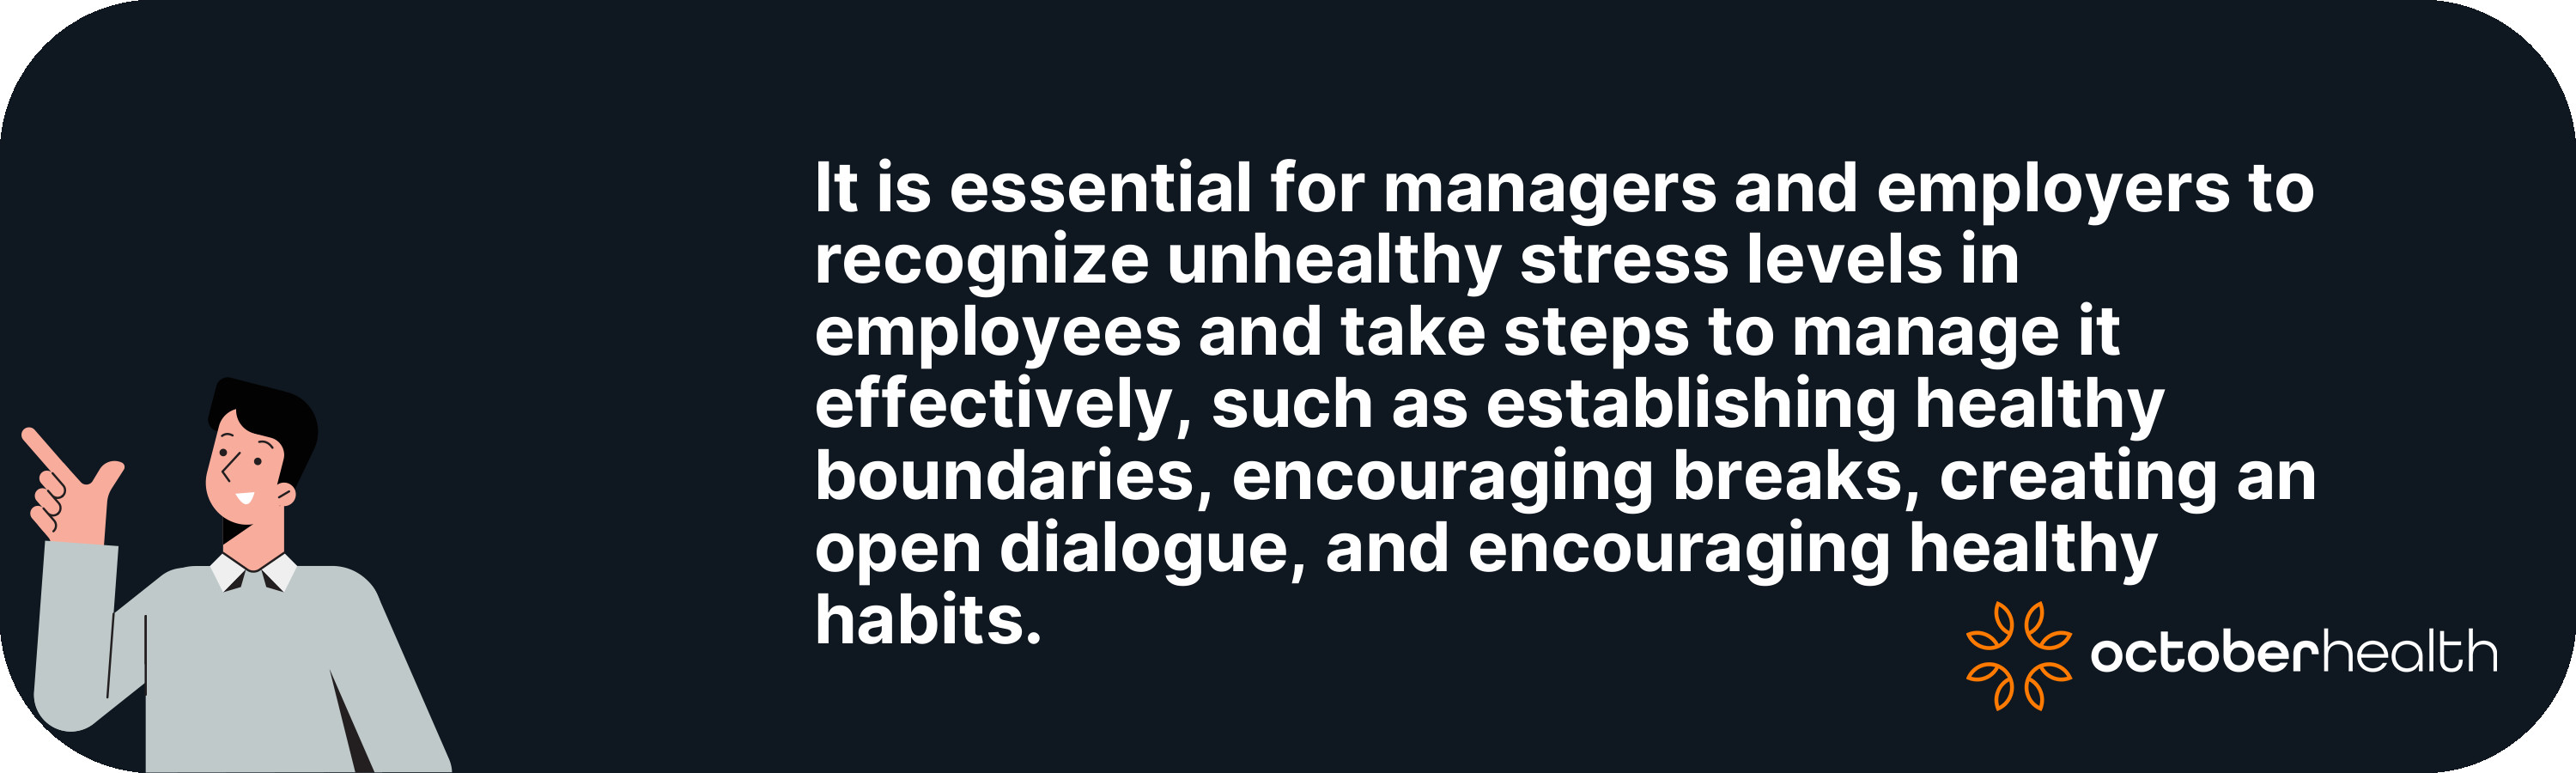 It is essential for managers and...